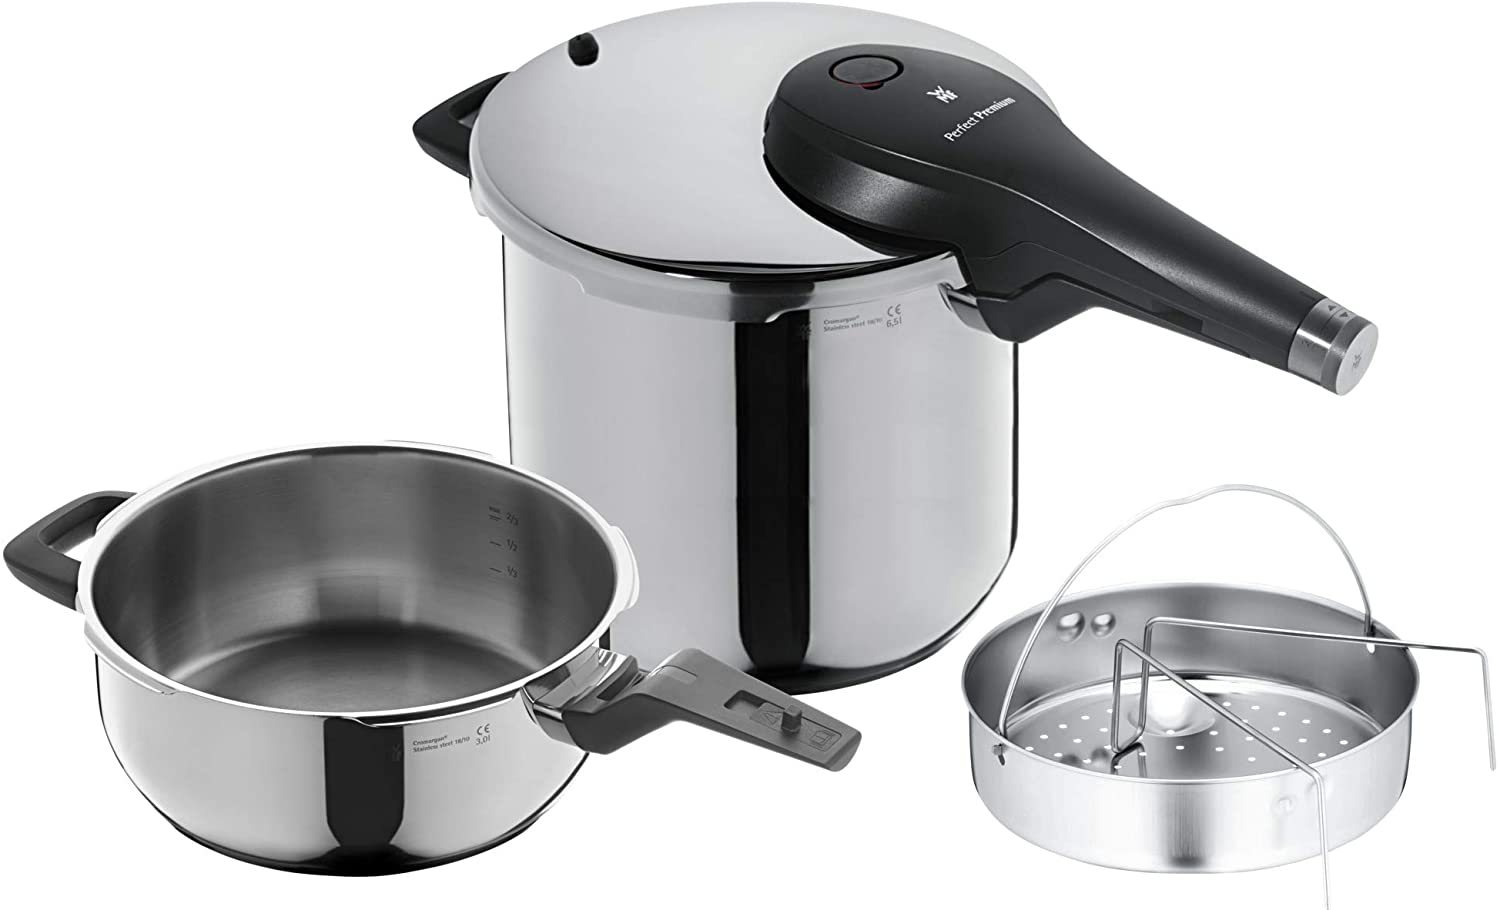 WMF Perfect Premium Pressure Cooker 6.5 L Set of 2 Cooking Levels Single-handed Pressure Regulator Polished & 3,0l with Insert Set Cromargan Stainless Steel, Dishwasher Safe, Diameter 22 cm Suitable for Induction, Stainless Steel, Silver, 2 Units